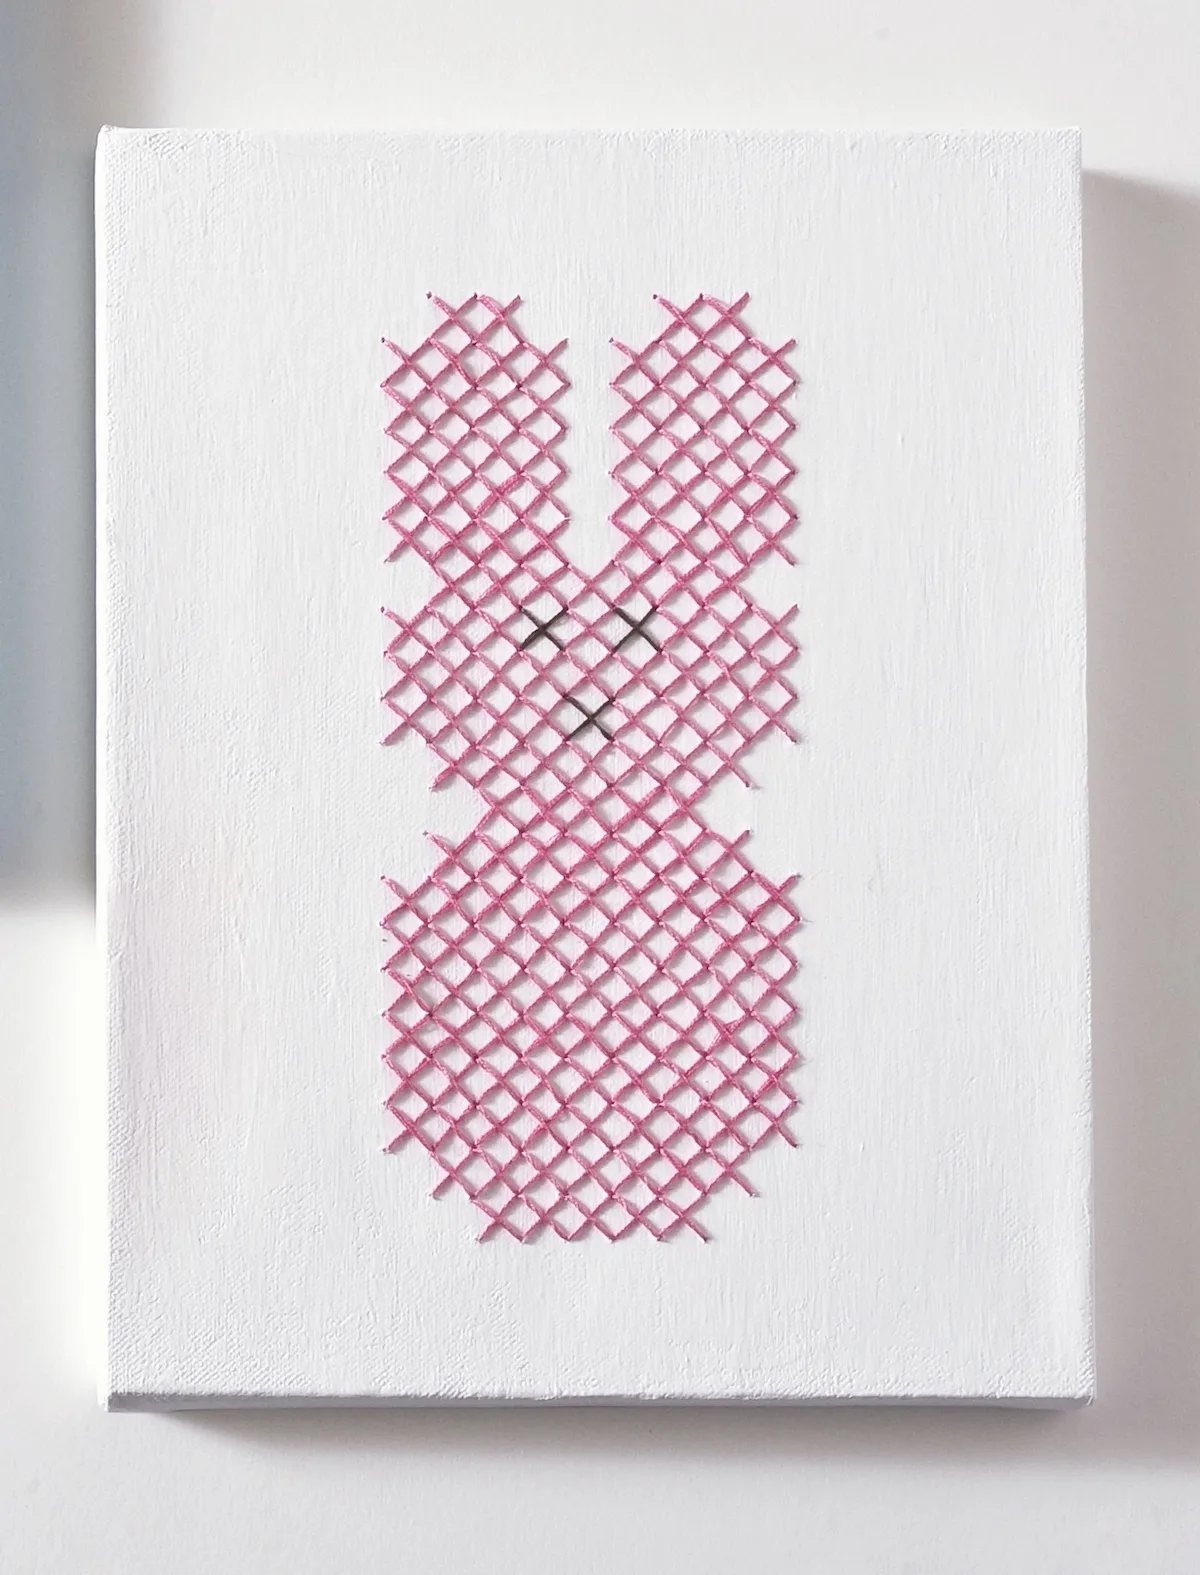 White Easter canvas with a pink bunny Peep